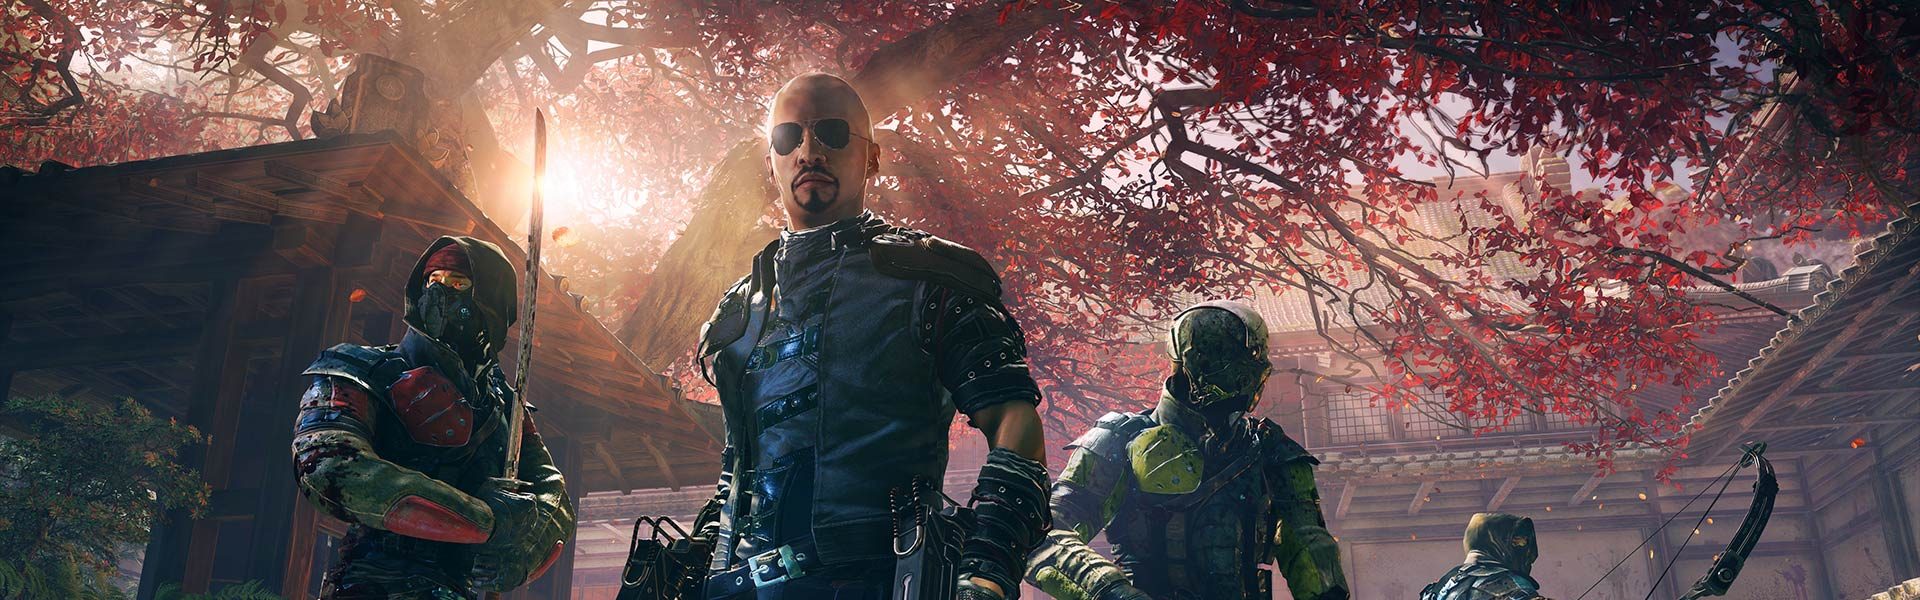 download shadow warrior 2 psn for free